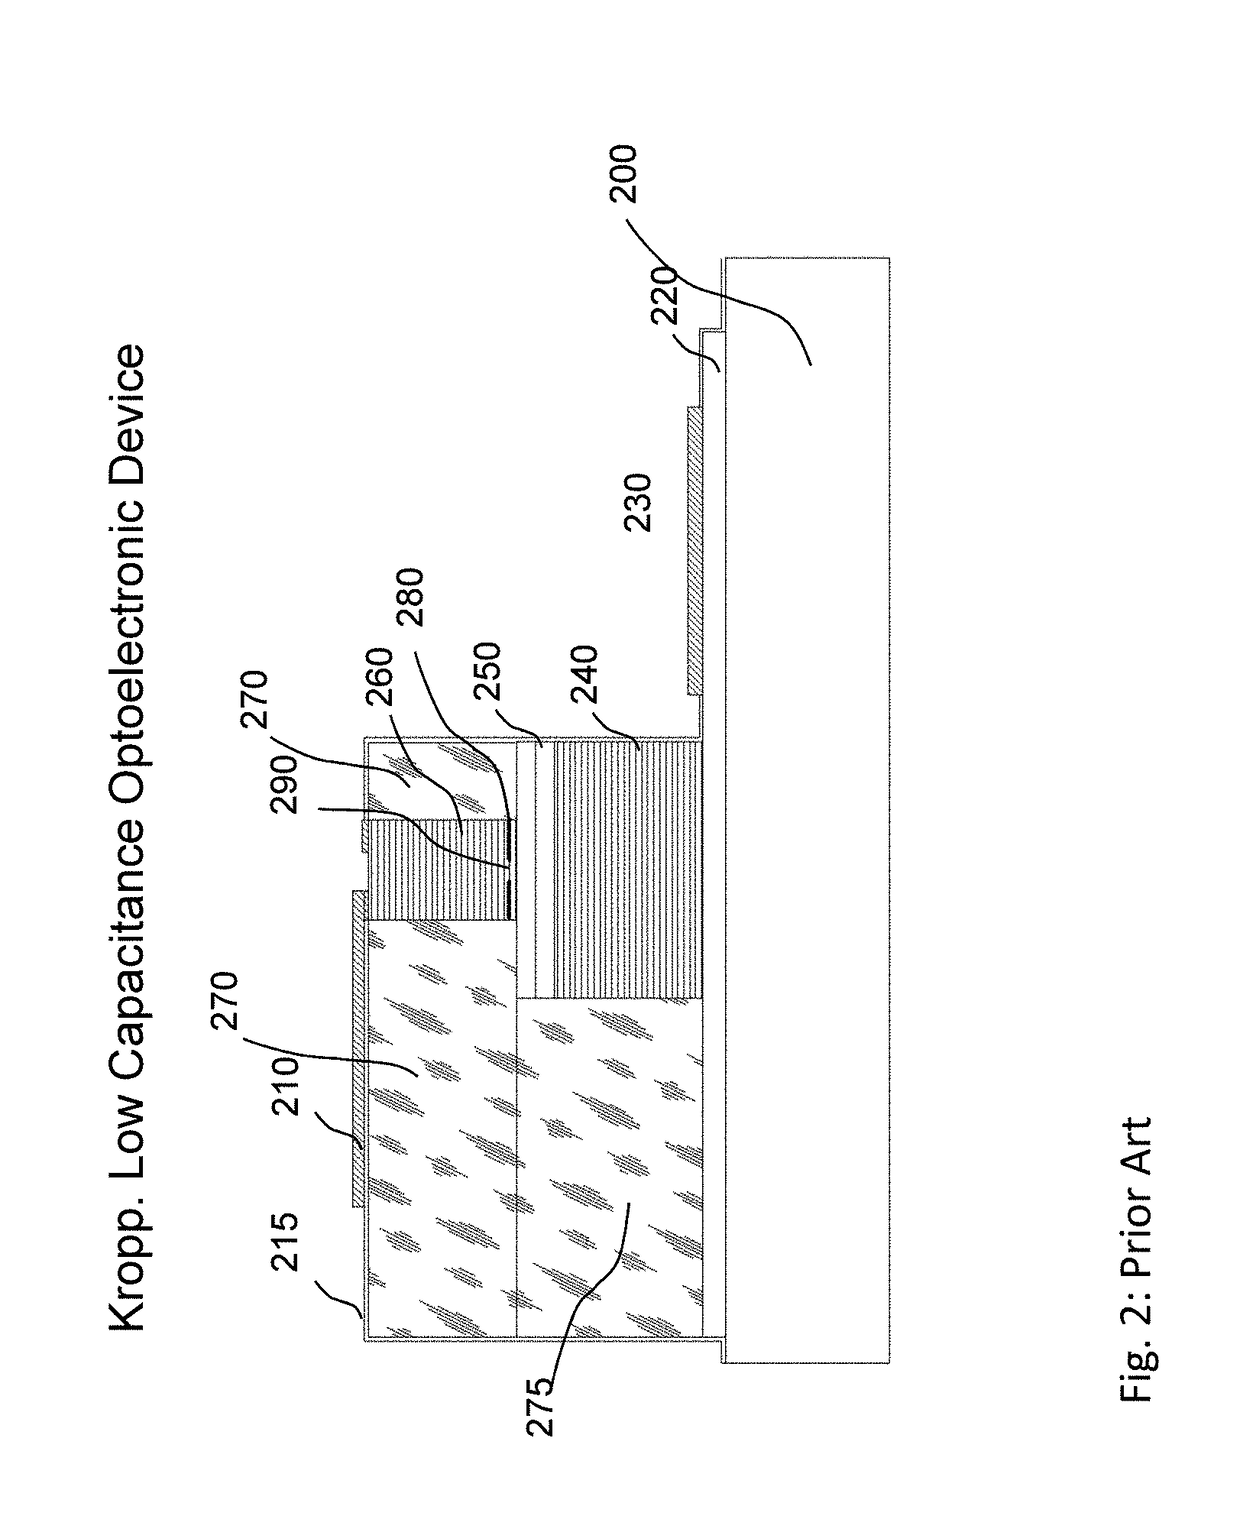 Low capacitance optoelectronic device